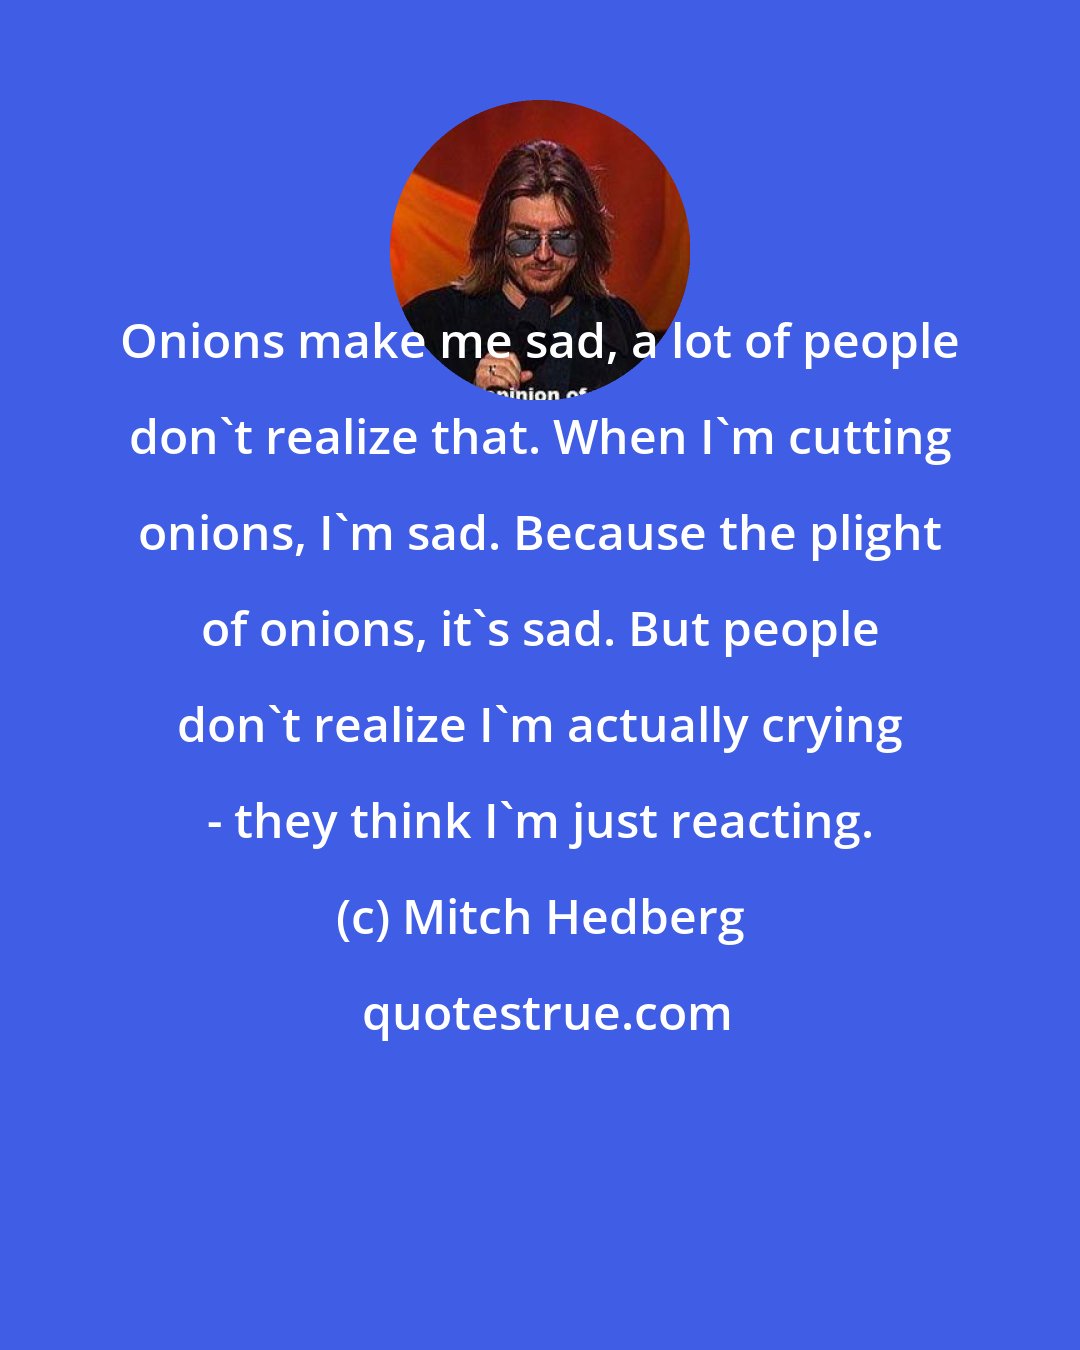 Mitch Hedberg: Onions make me sad, a lot of people don't realize that. When I'm cutting onions, I'm sad. Because the plight of onions, it's sad. But people don't realize I'm actually crying - they think I'm just reacting.